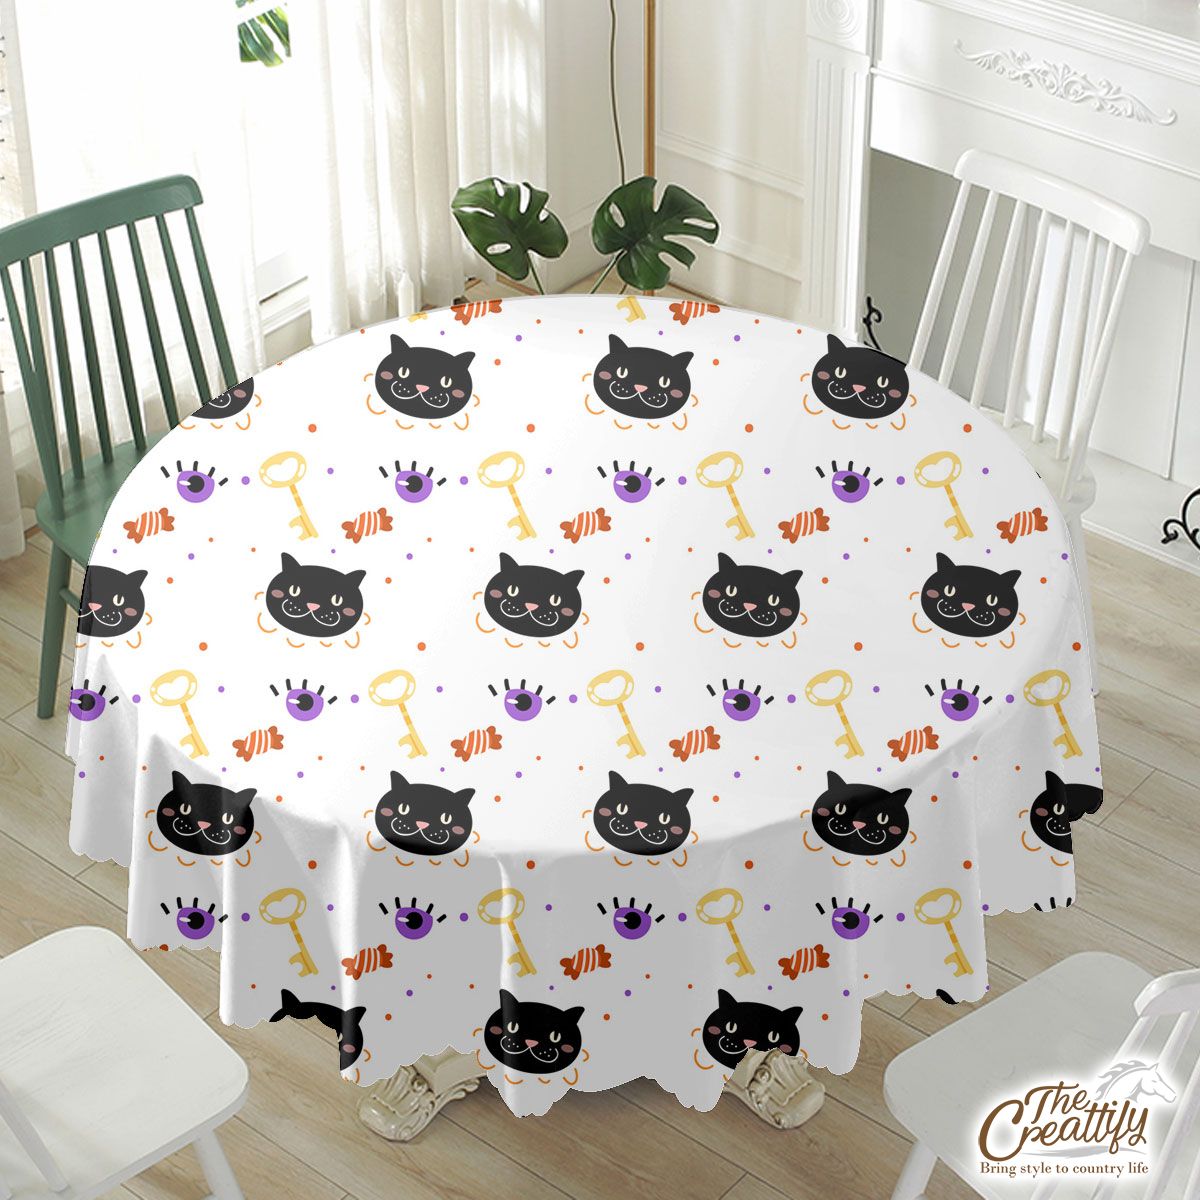 Halloween Scary, Evil Eye and Black Cat Orange White Waterproof Tablecloth